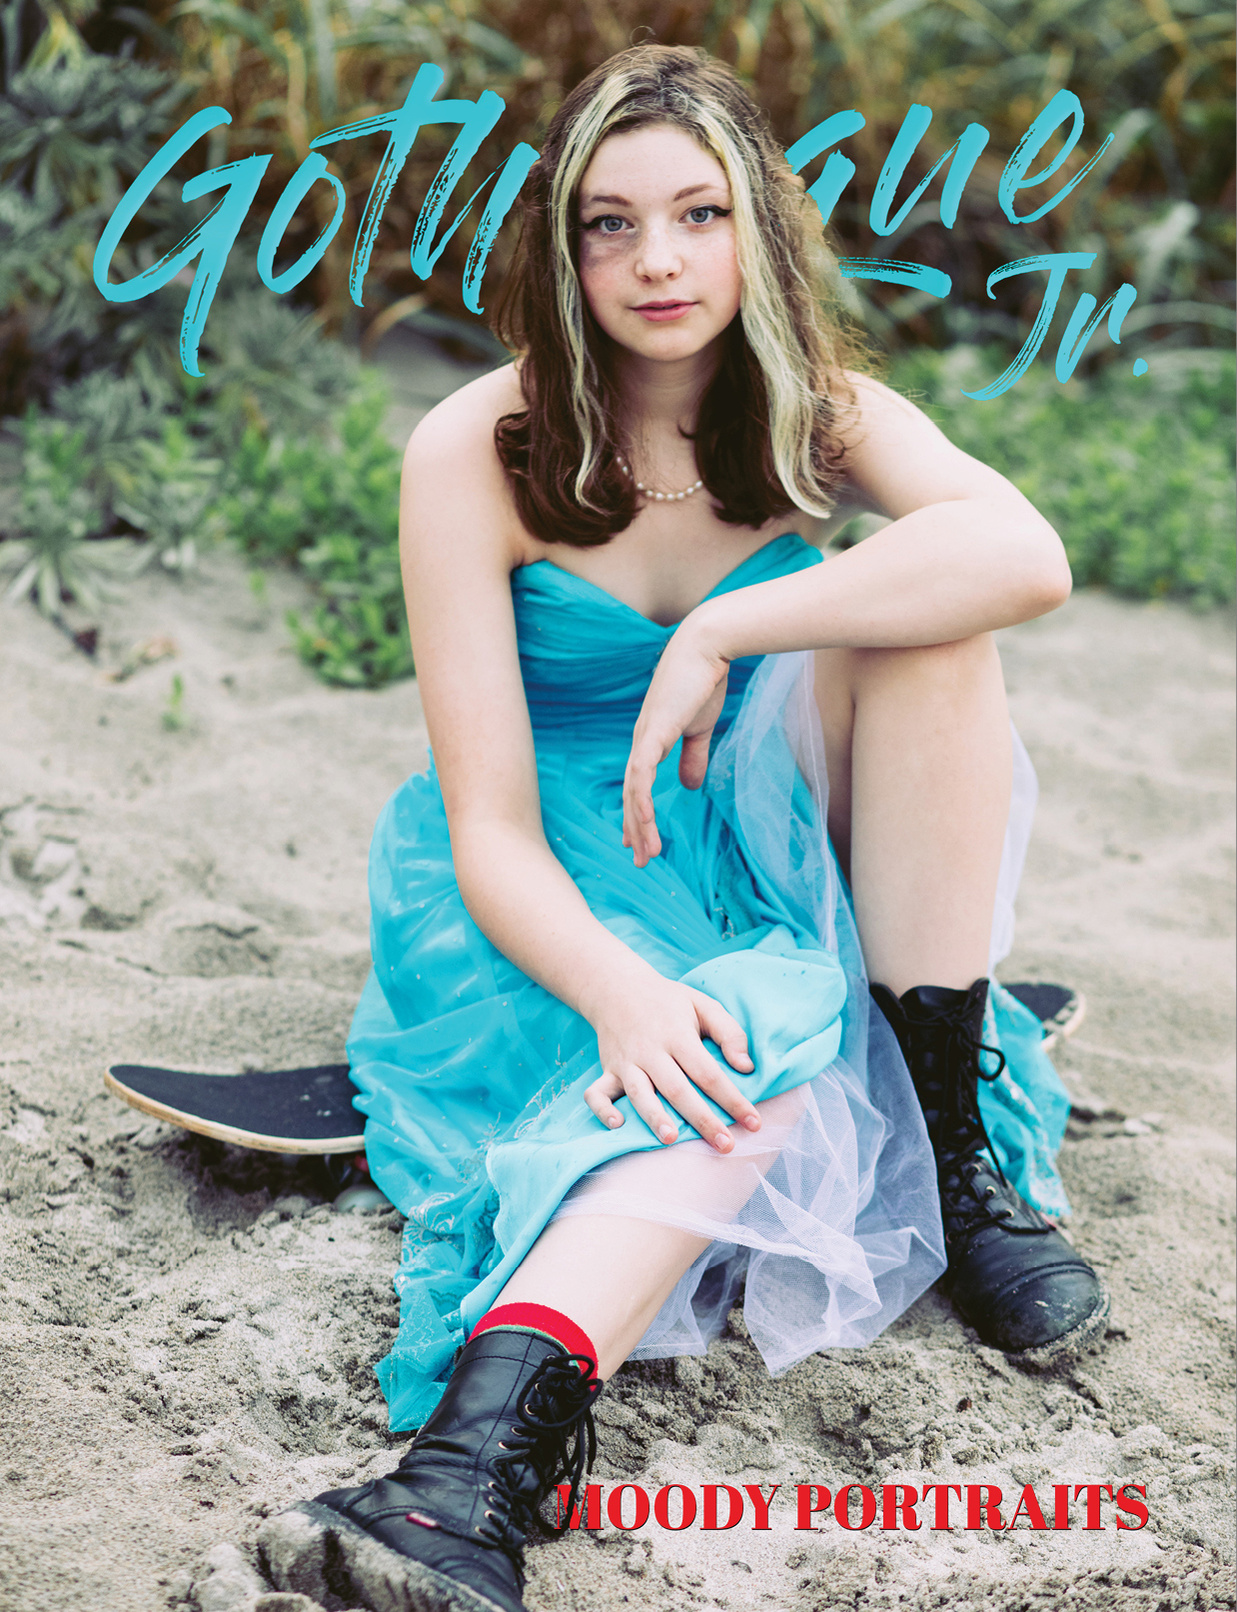 Back cover of Maddie on Gothesque Jr.